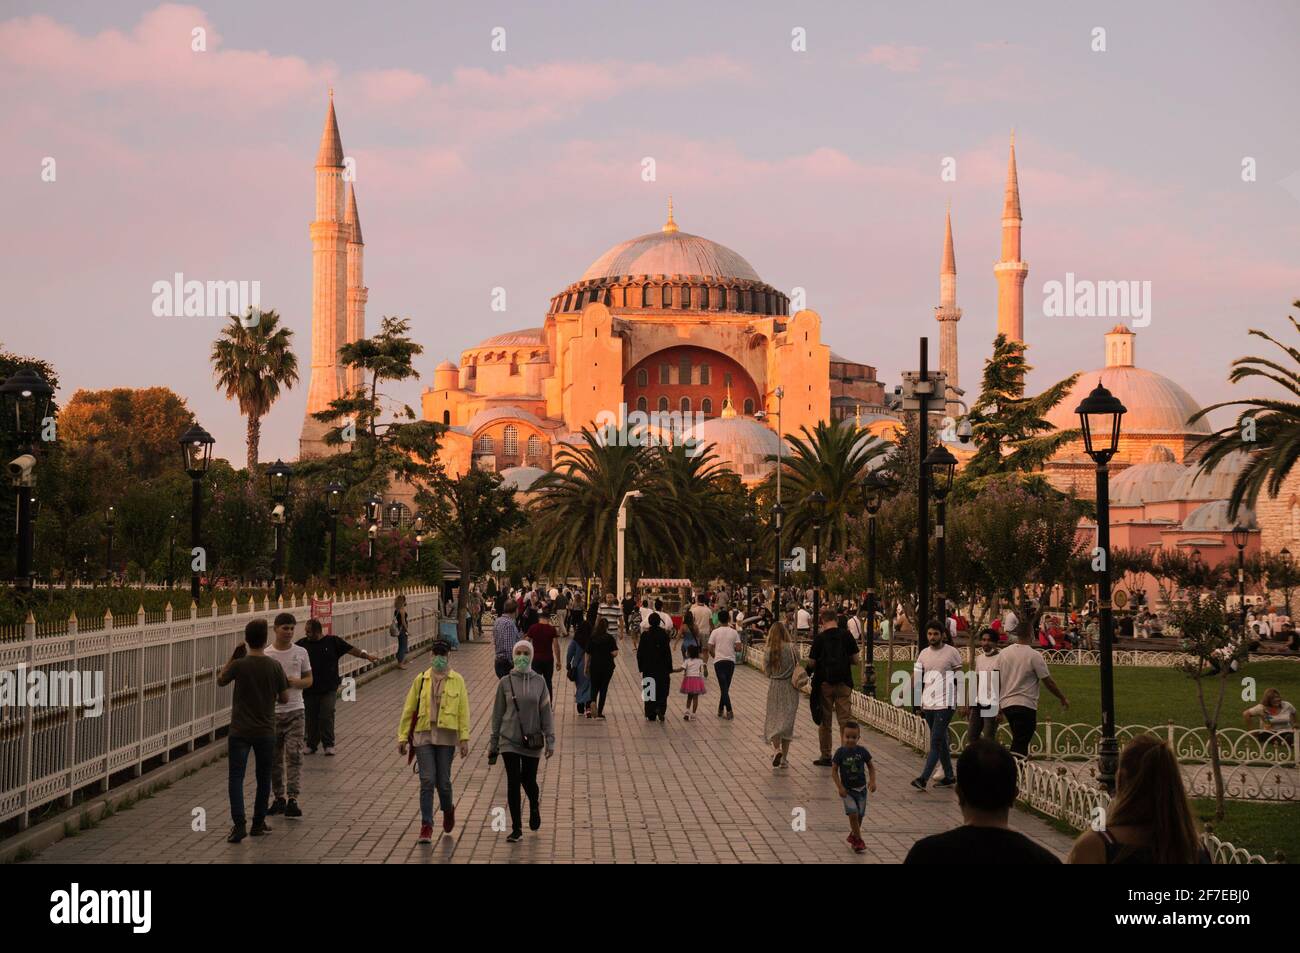 ISTANBUL, TURKEY - 09 07 2020: People walking in Sultan Ahmet Park in front of Hagia Sophia Cathedral Mosque Basilica lit with warm sunset sun rays in Stock Photo